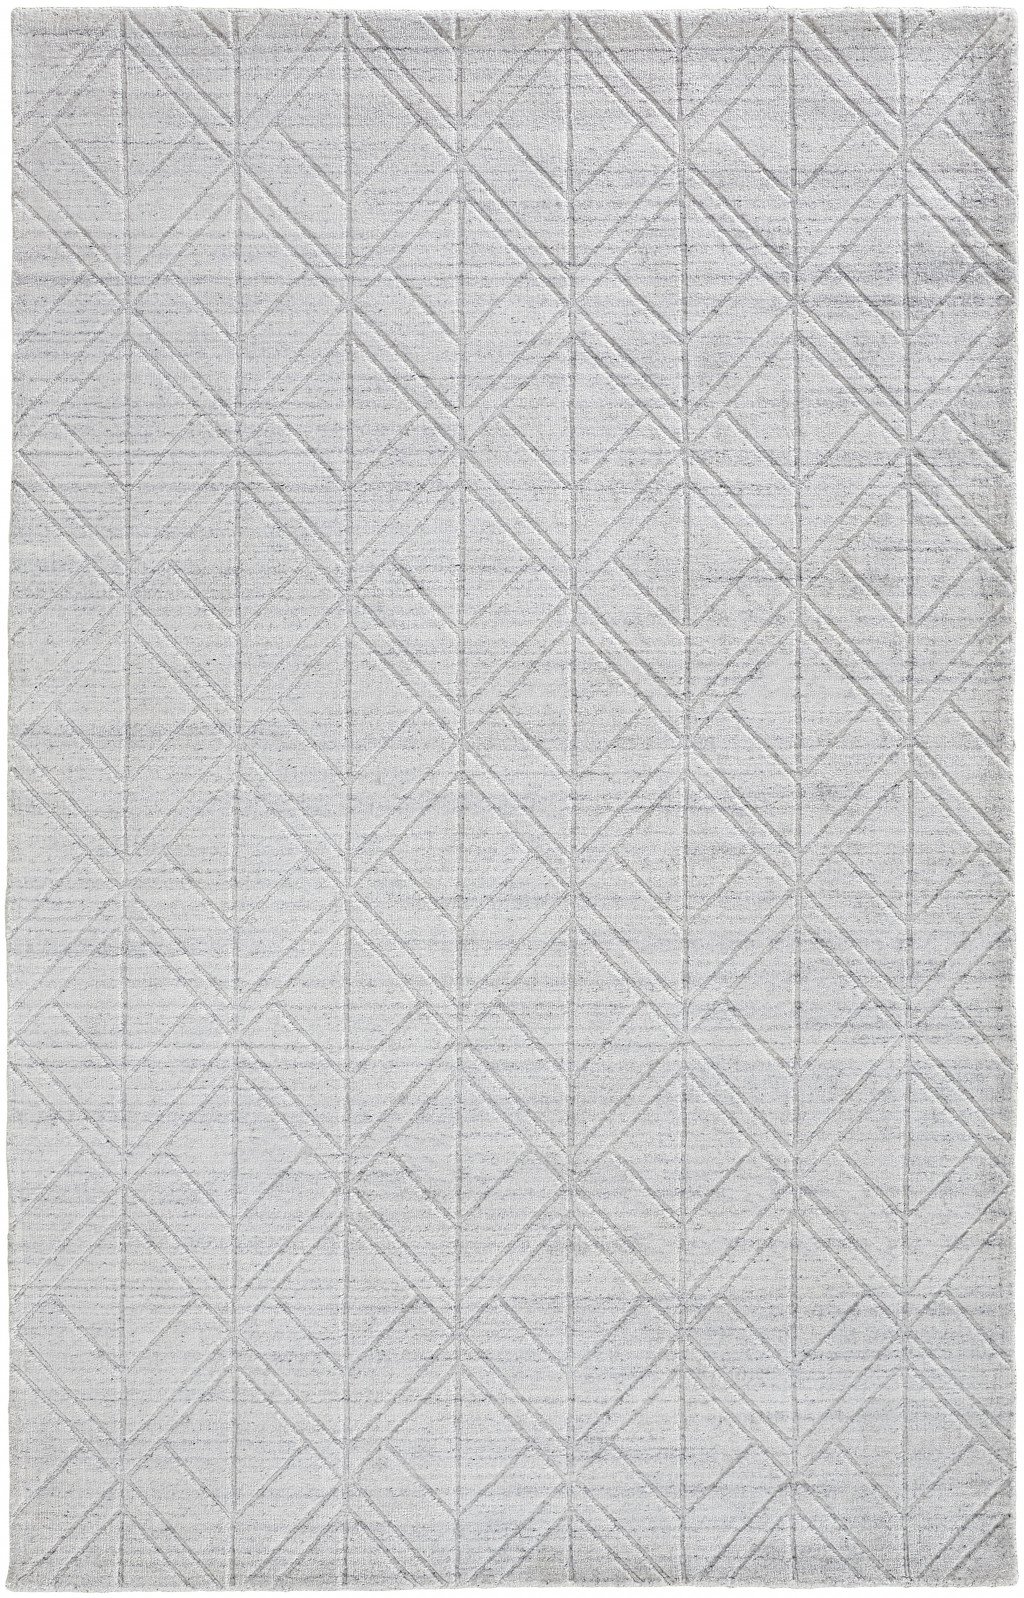 12' X 15' White And Silver Striped Hand Woven Area Rug-514782-1